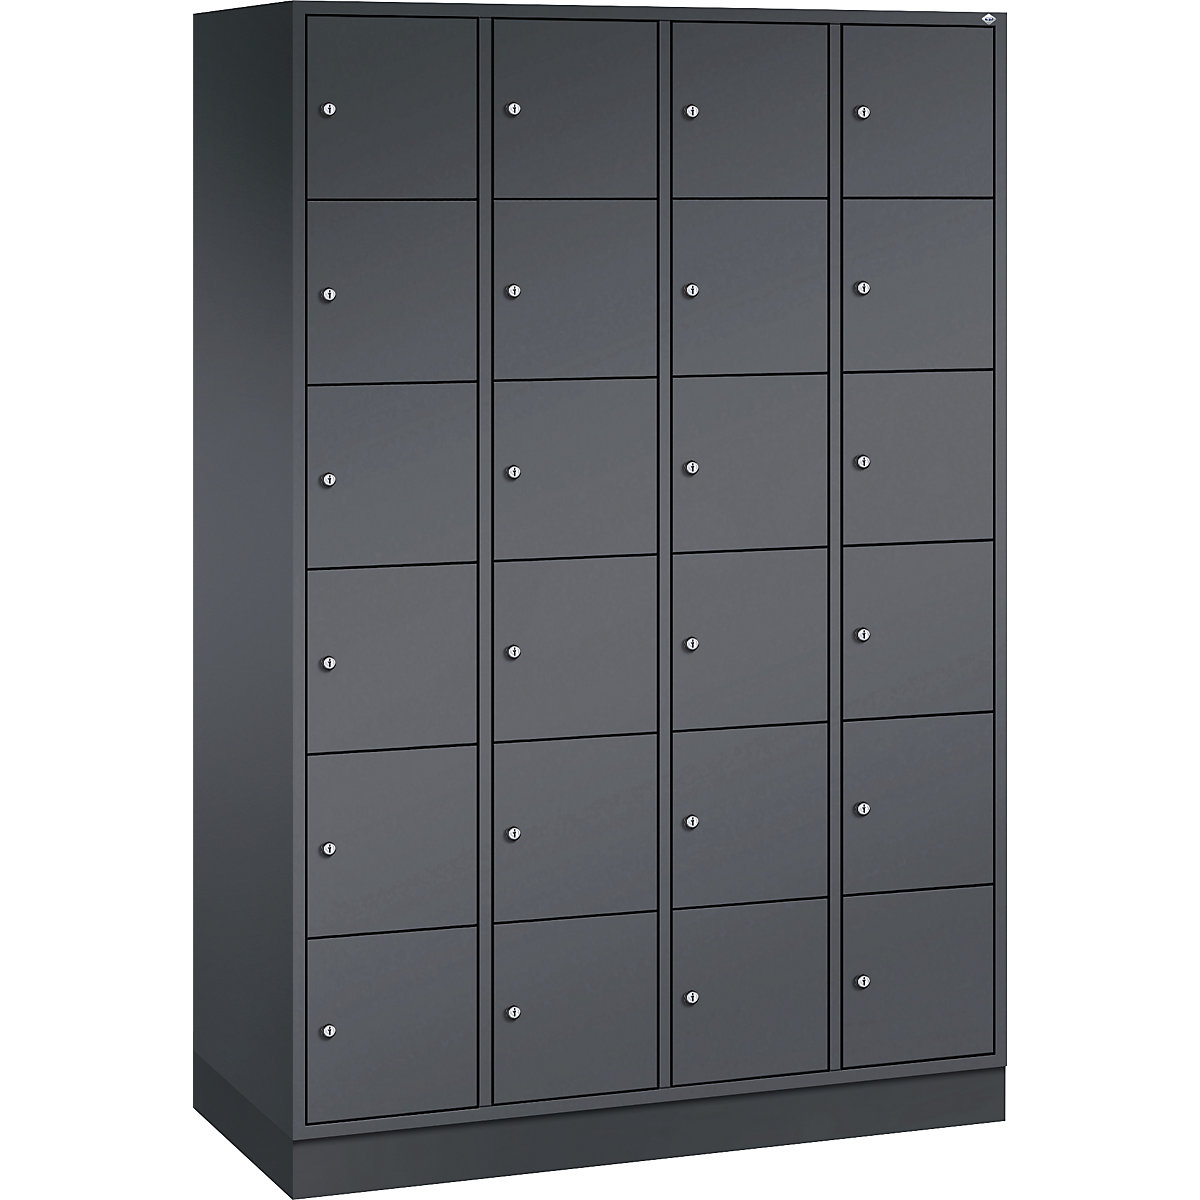 INTRO steel compartment locker, compartment height 285 mm – C+P, WxD 1220 x 500 mm, 24 compartments, black grey body, black grey doors-6